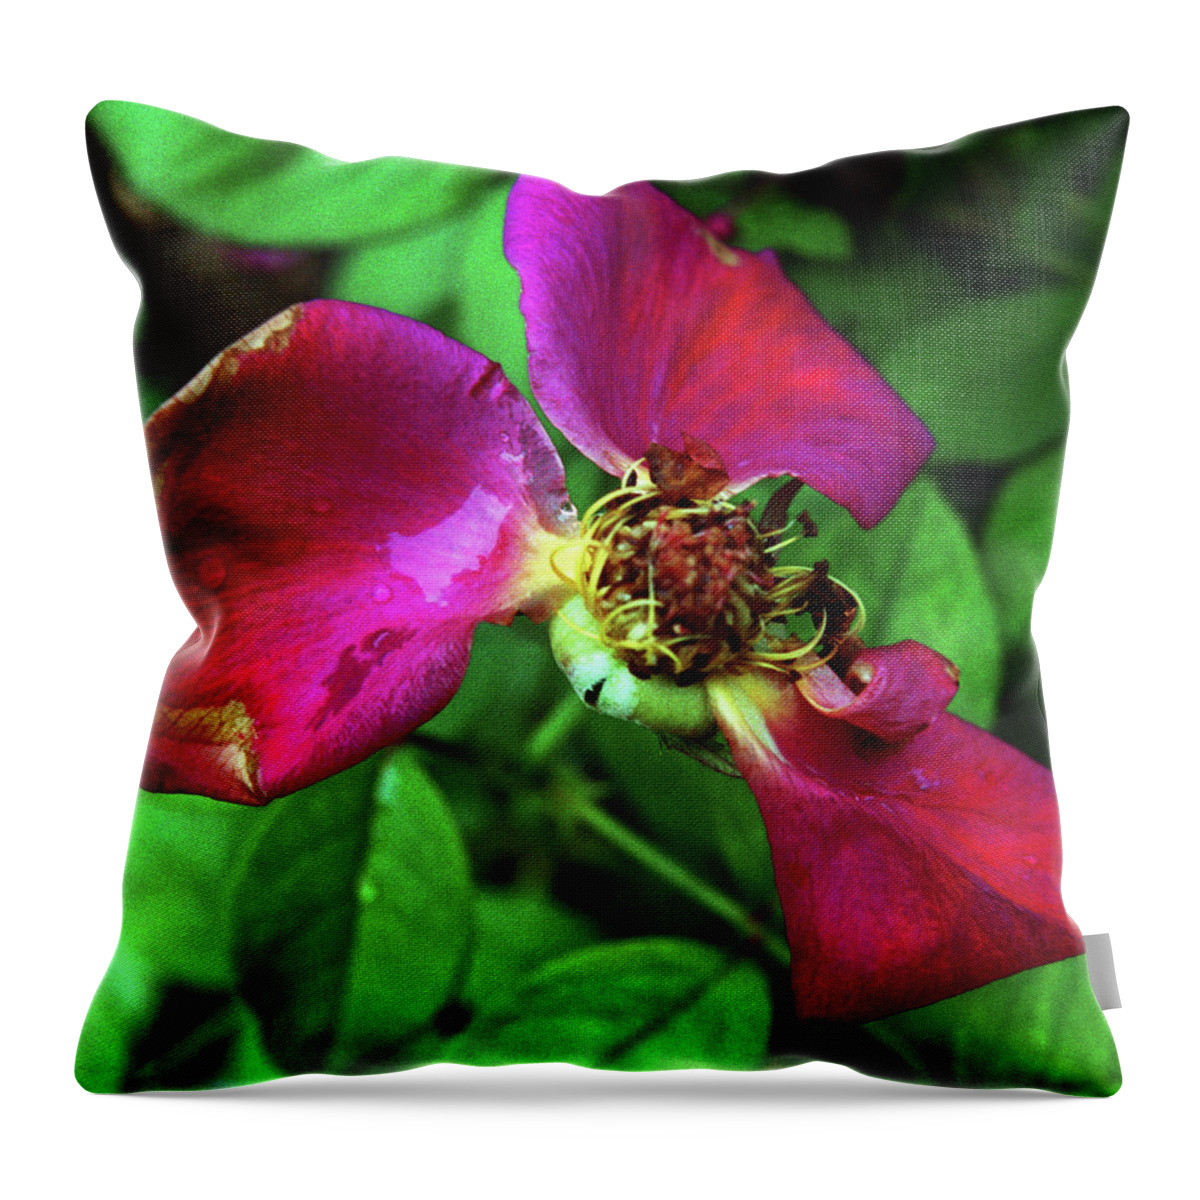 Rose Throw Pillow featuring the photograph Graceful Aging by Wanda Brandon